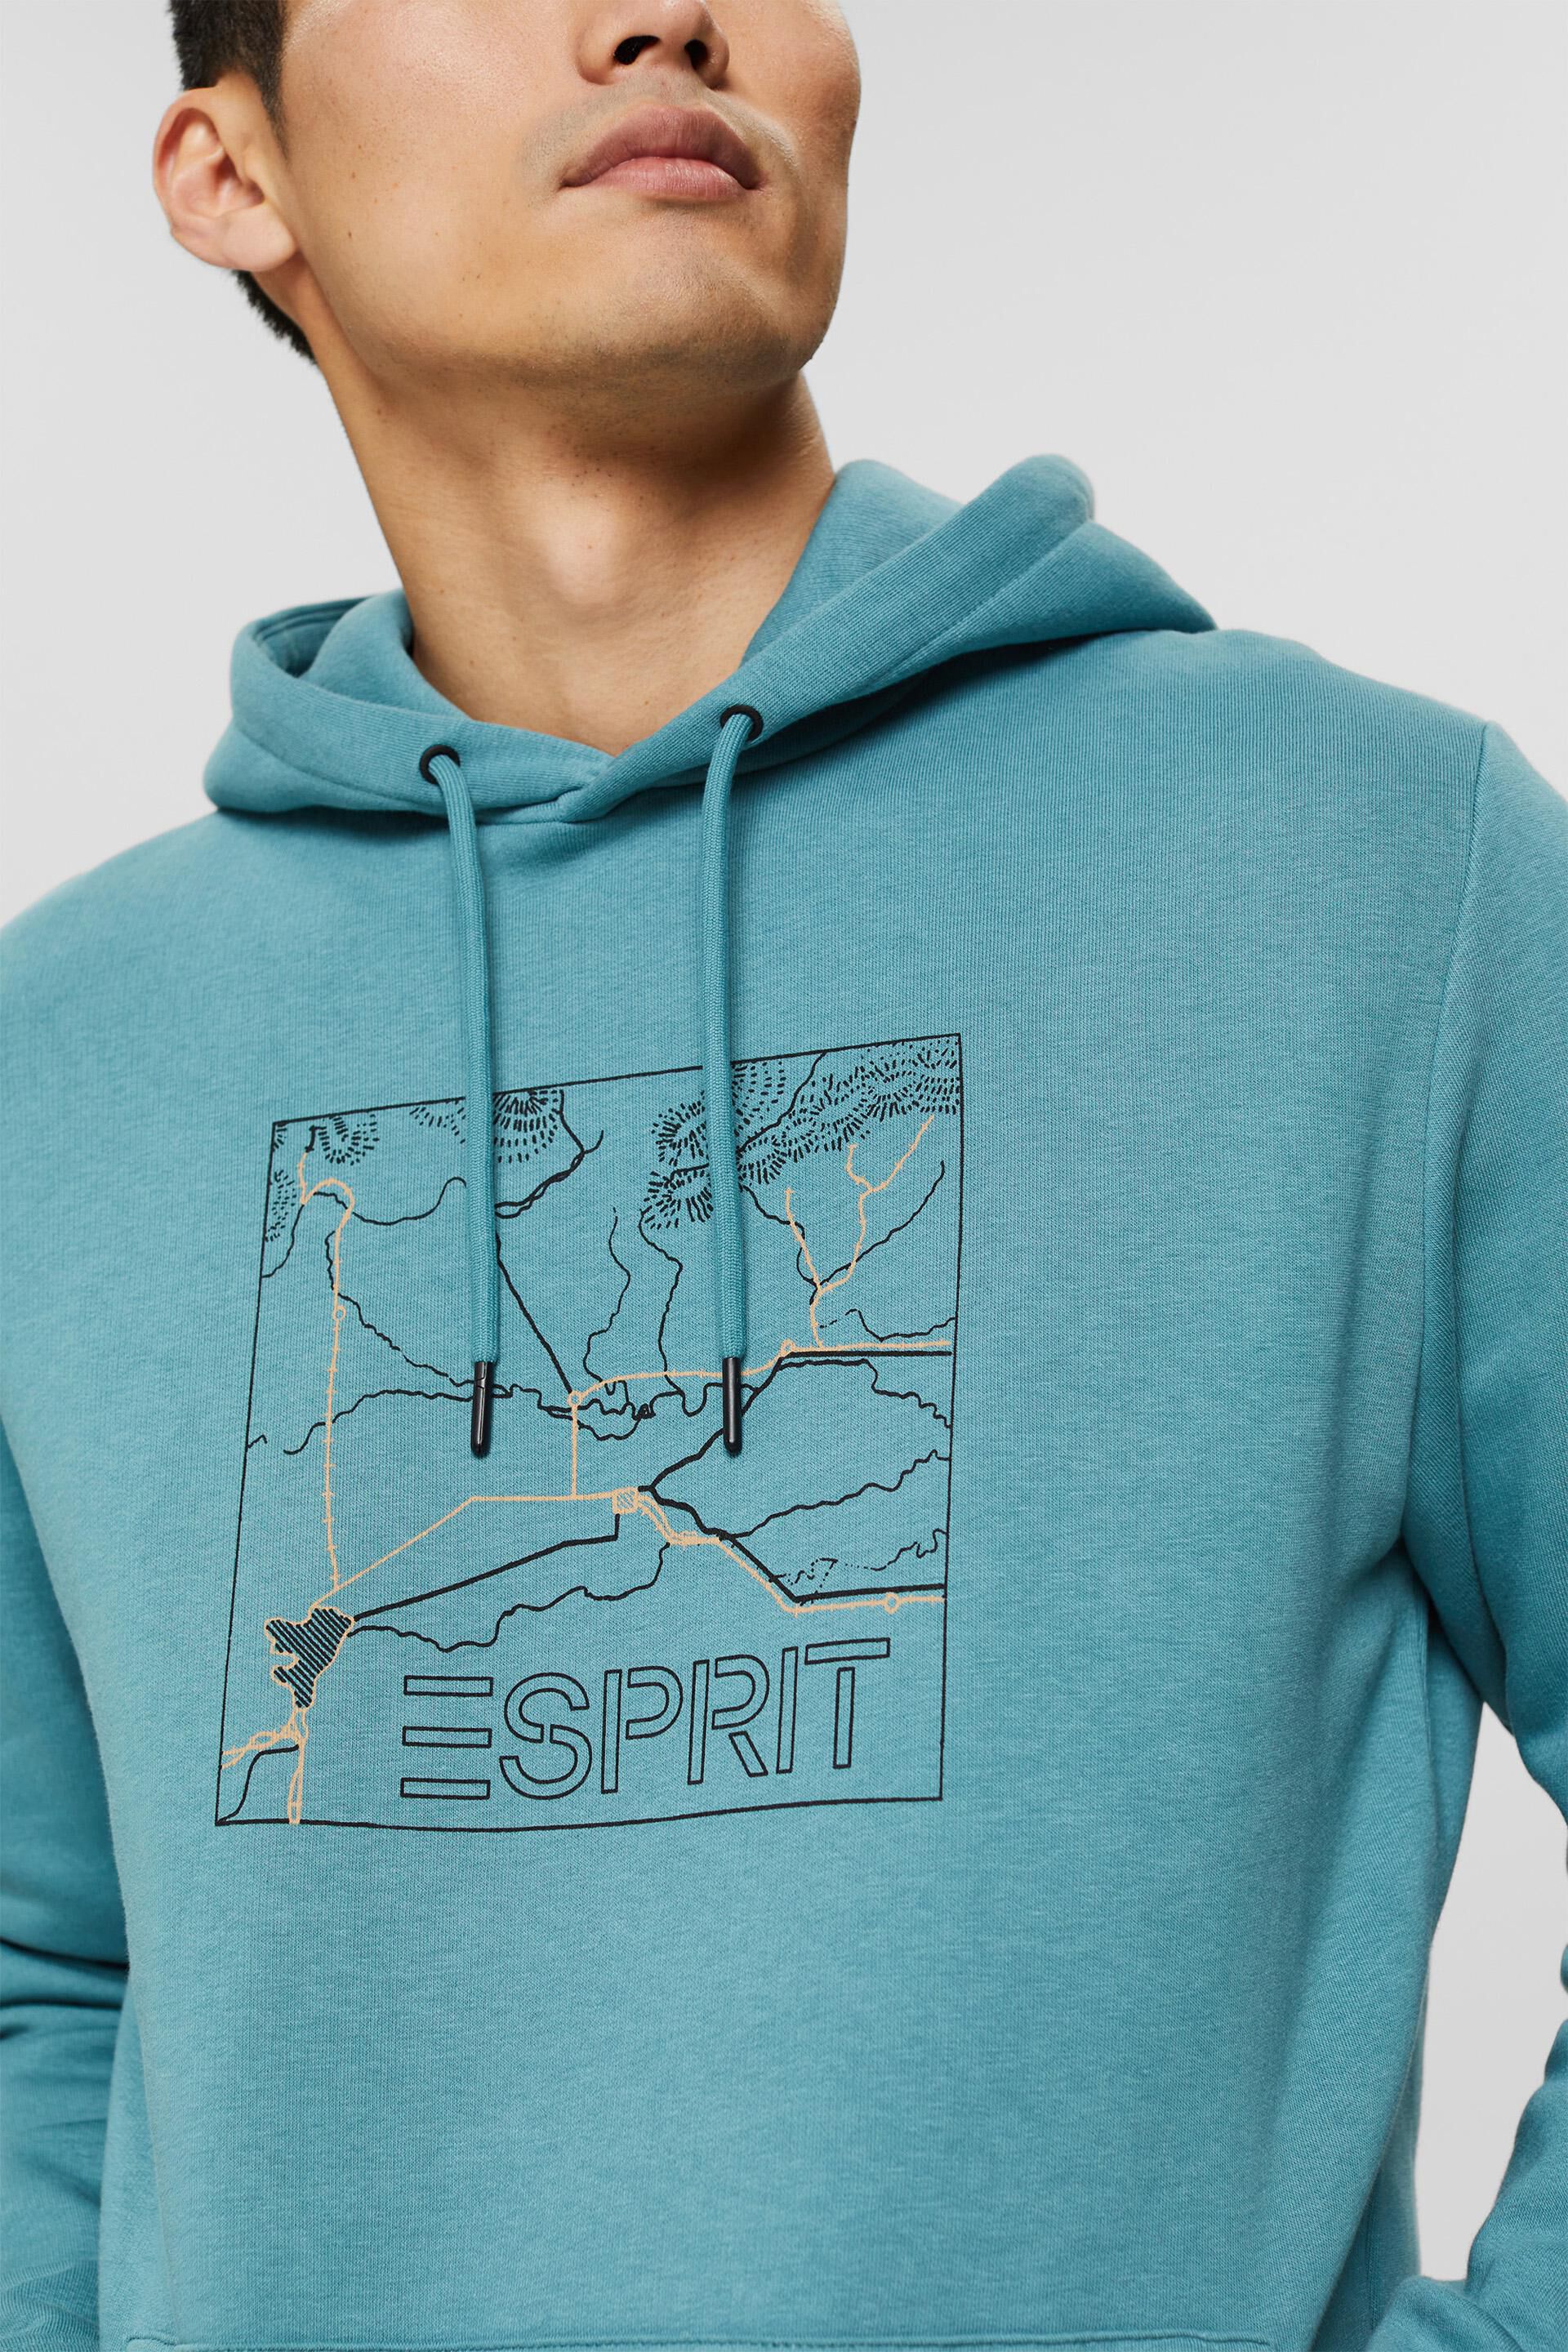 Esprit sweatshirt recycled with print Made material: hoodie of